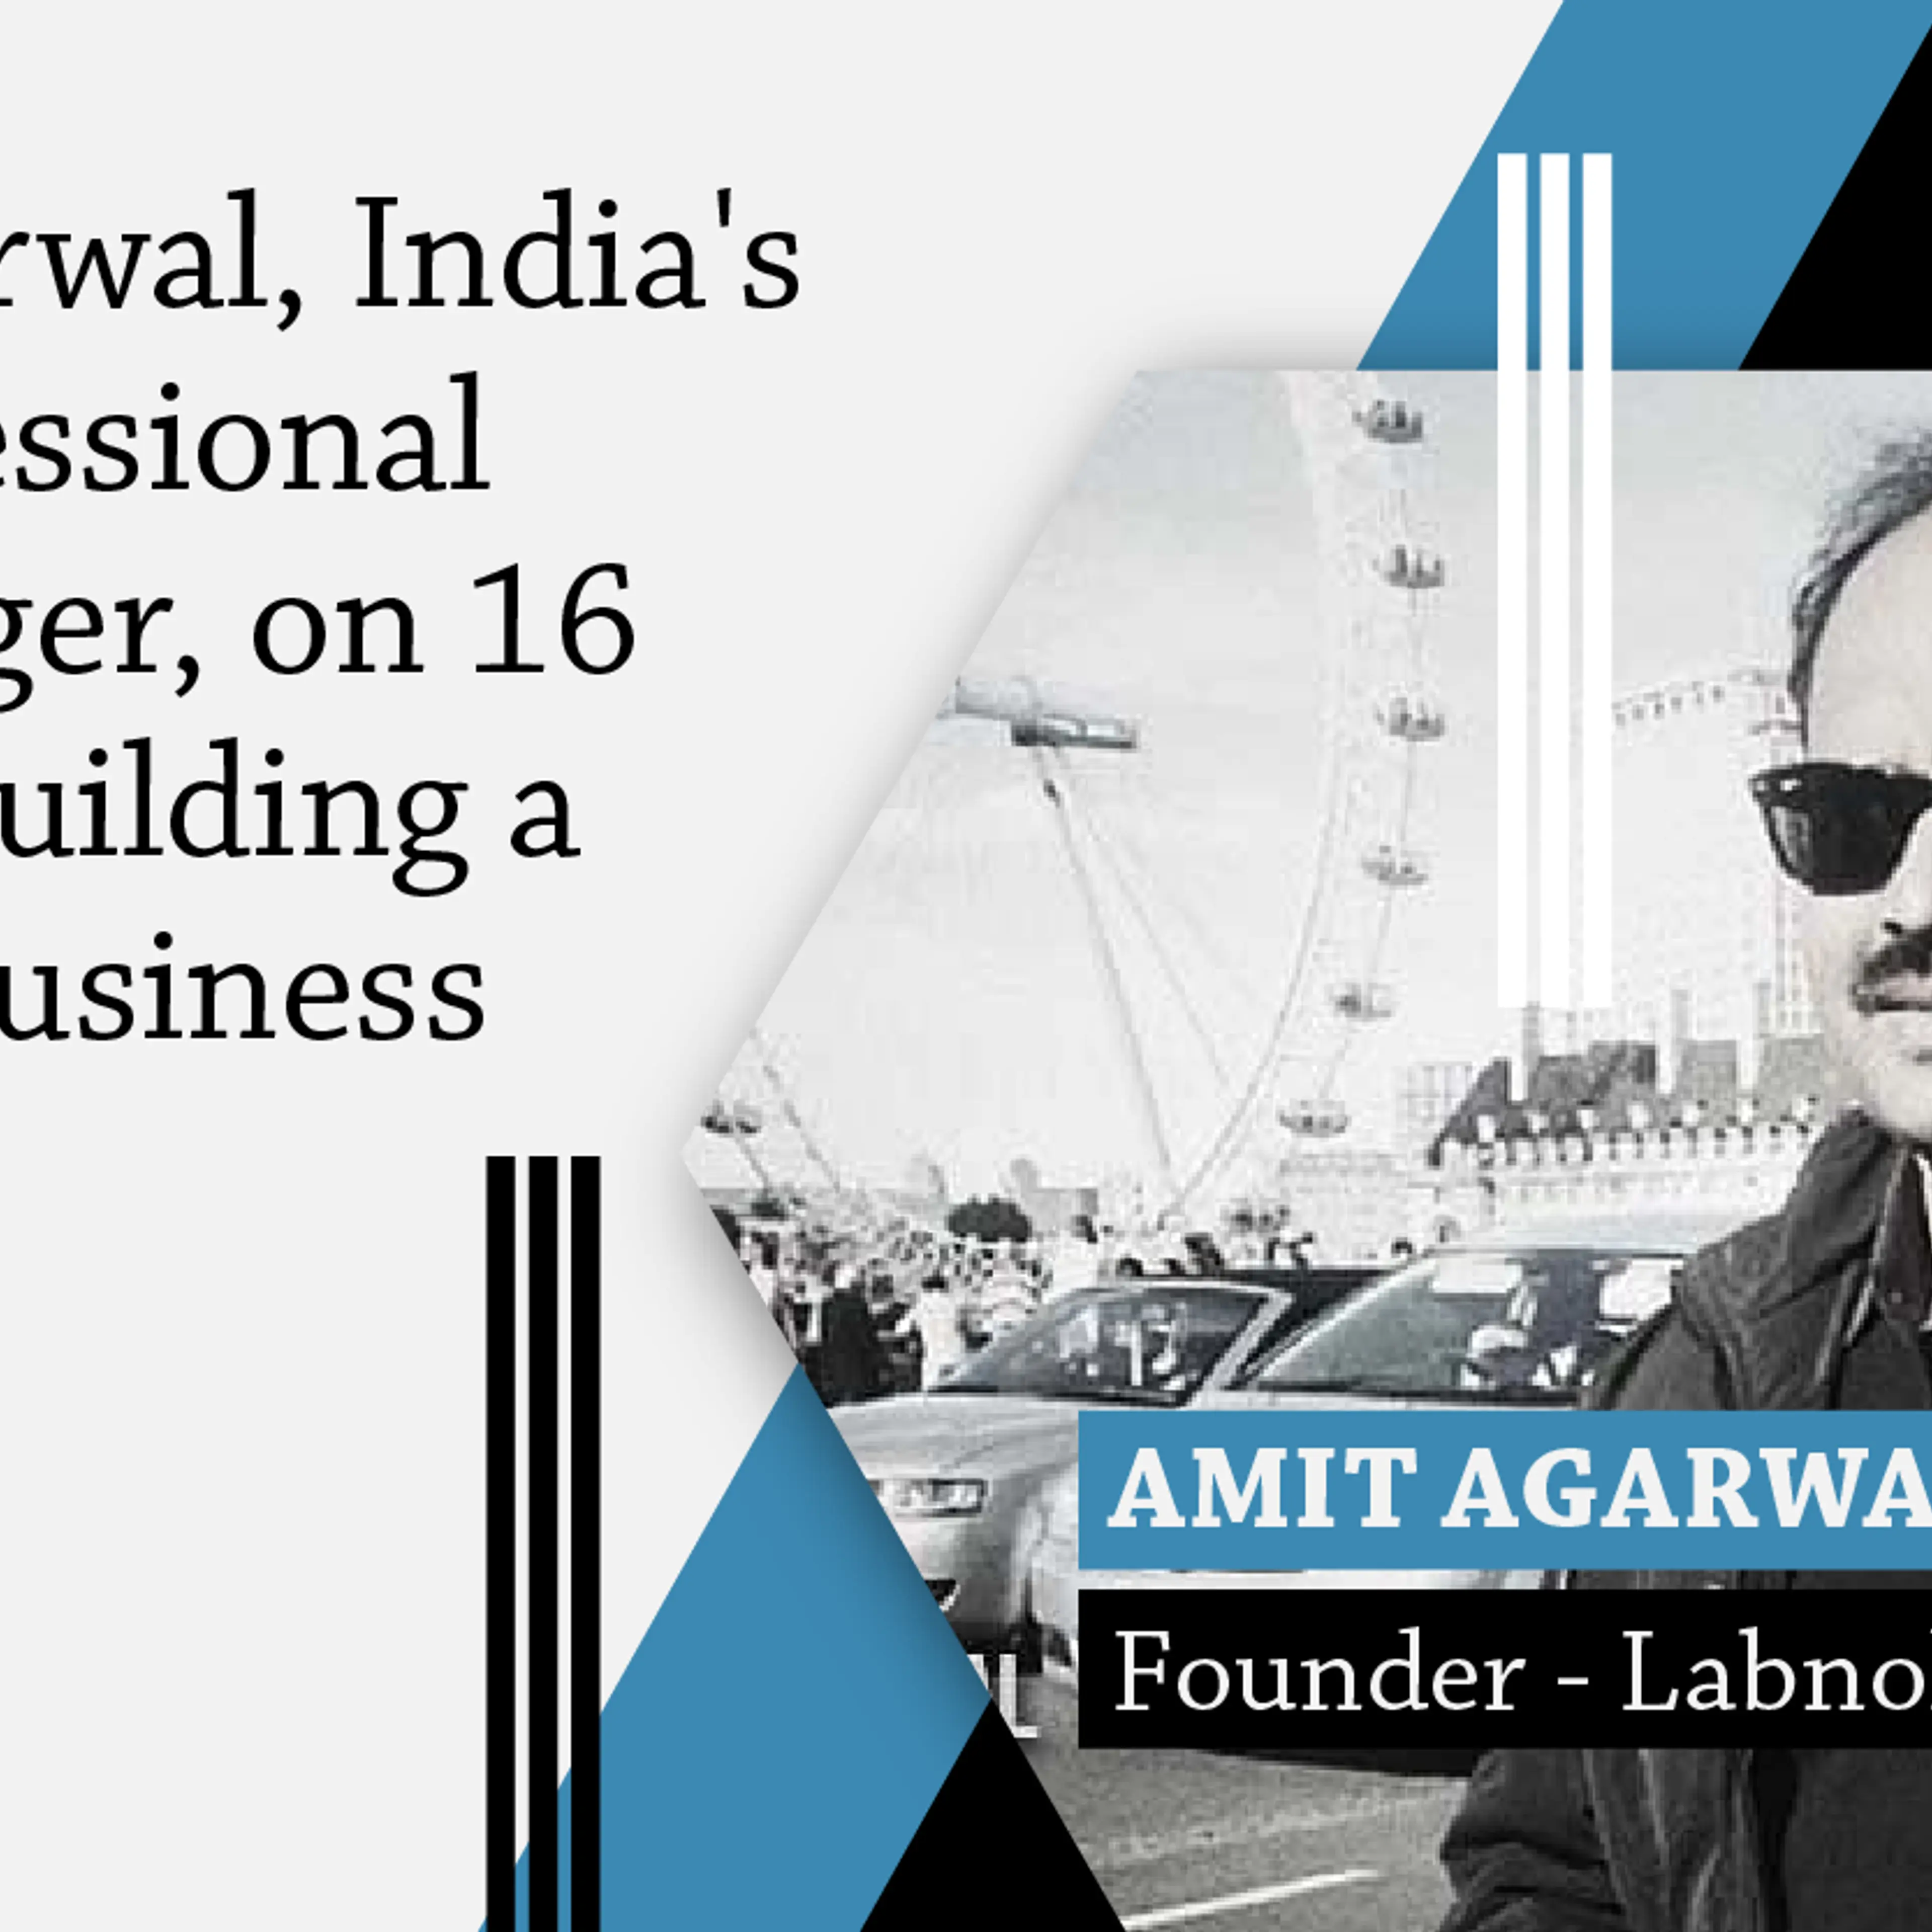 Top tech blogger Amit Agarwal on building a global content business for over 15 years